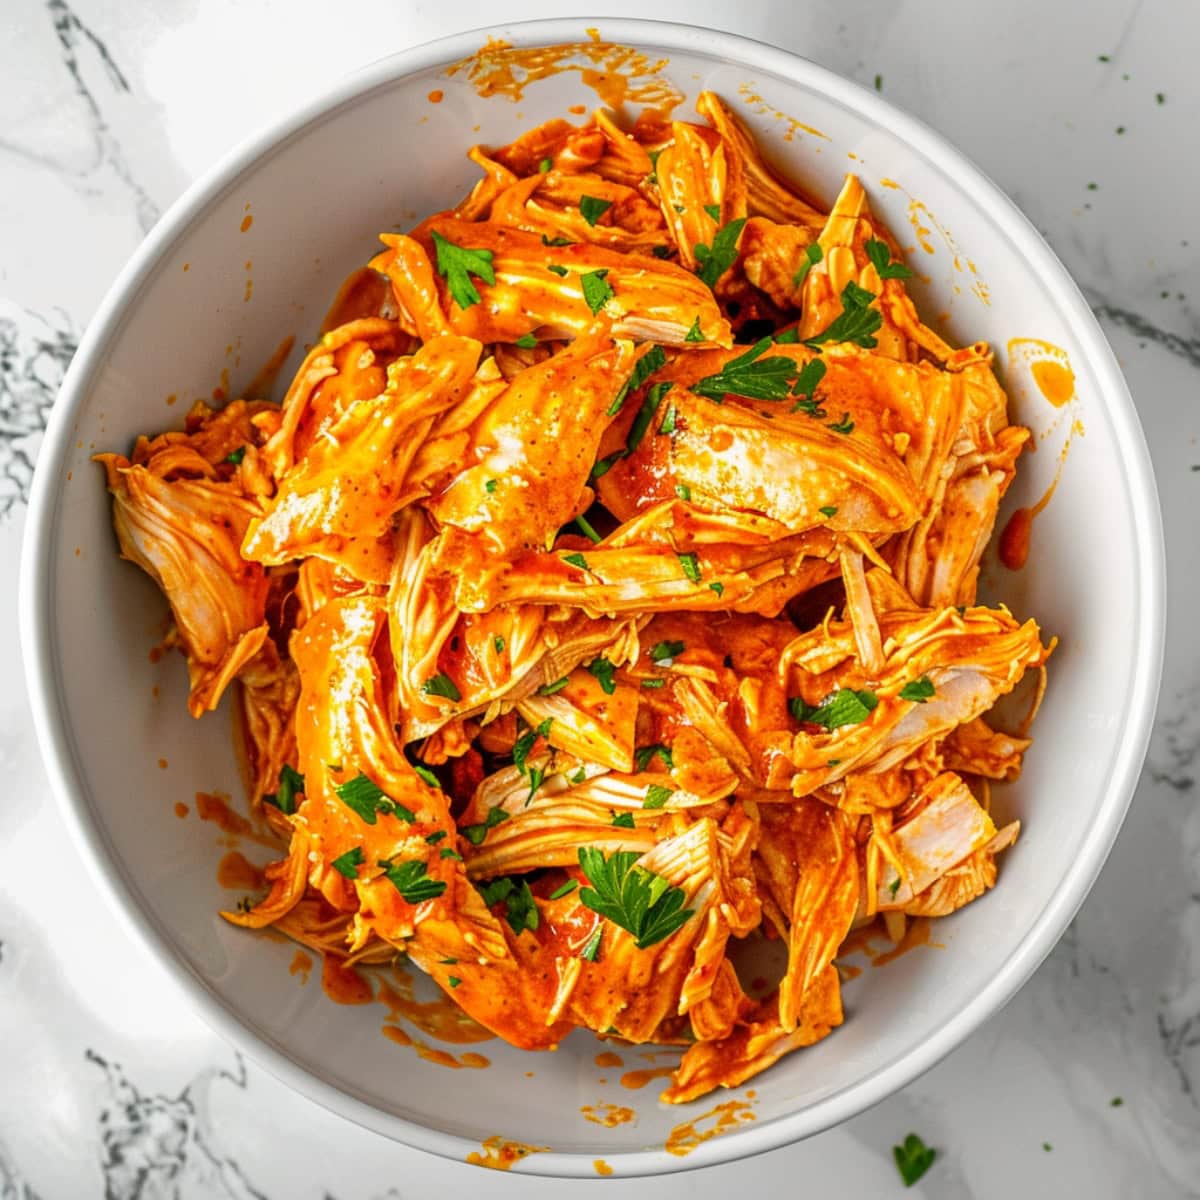 Bowl of shredded chicken covered in buffalo sauce.